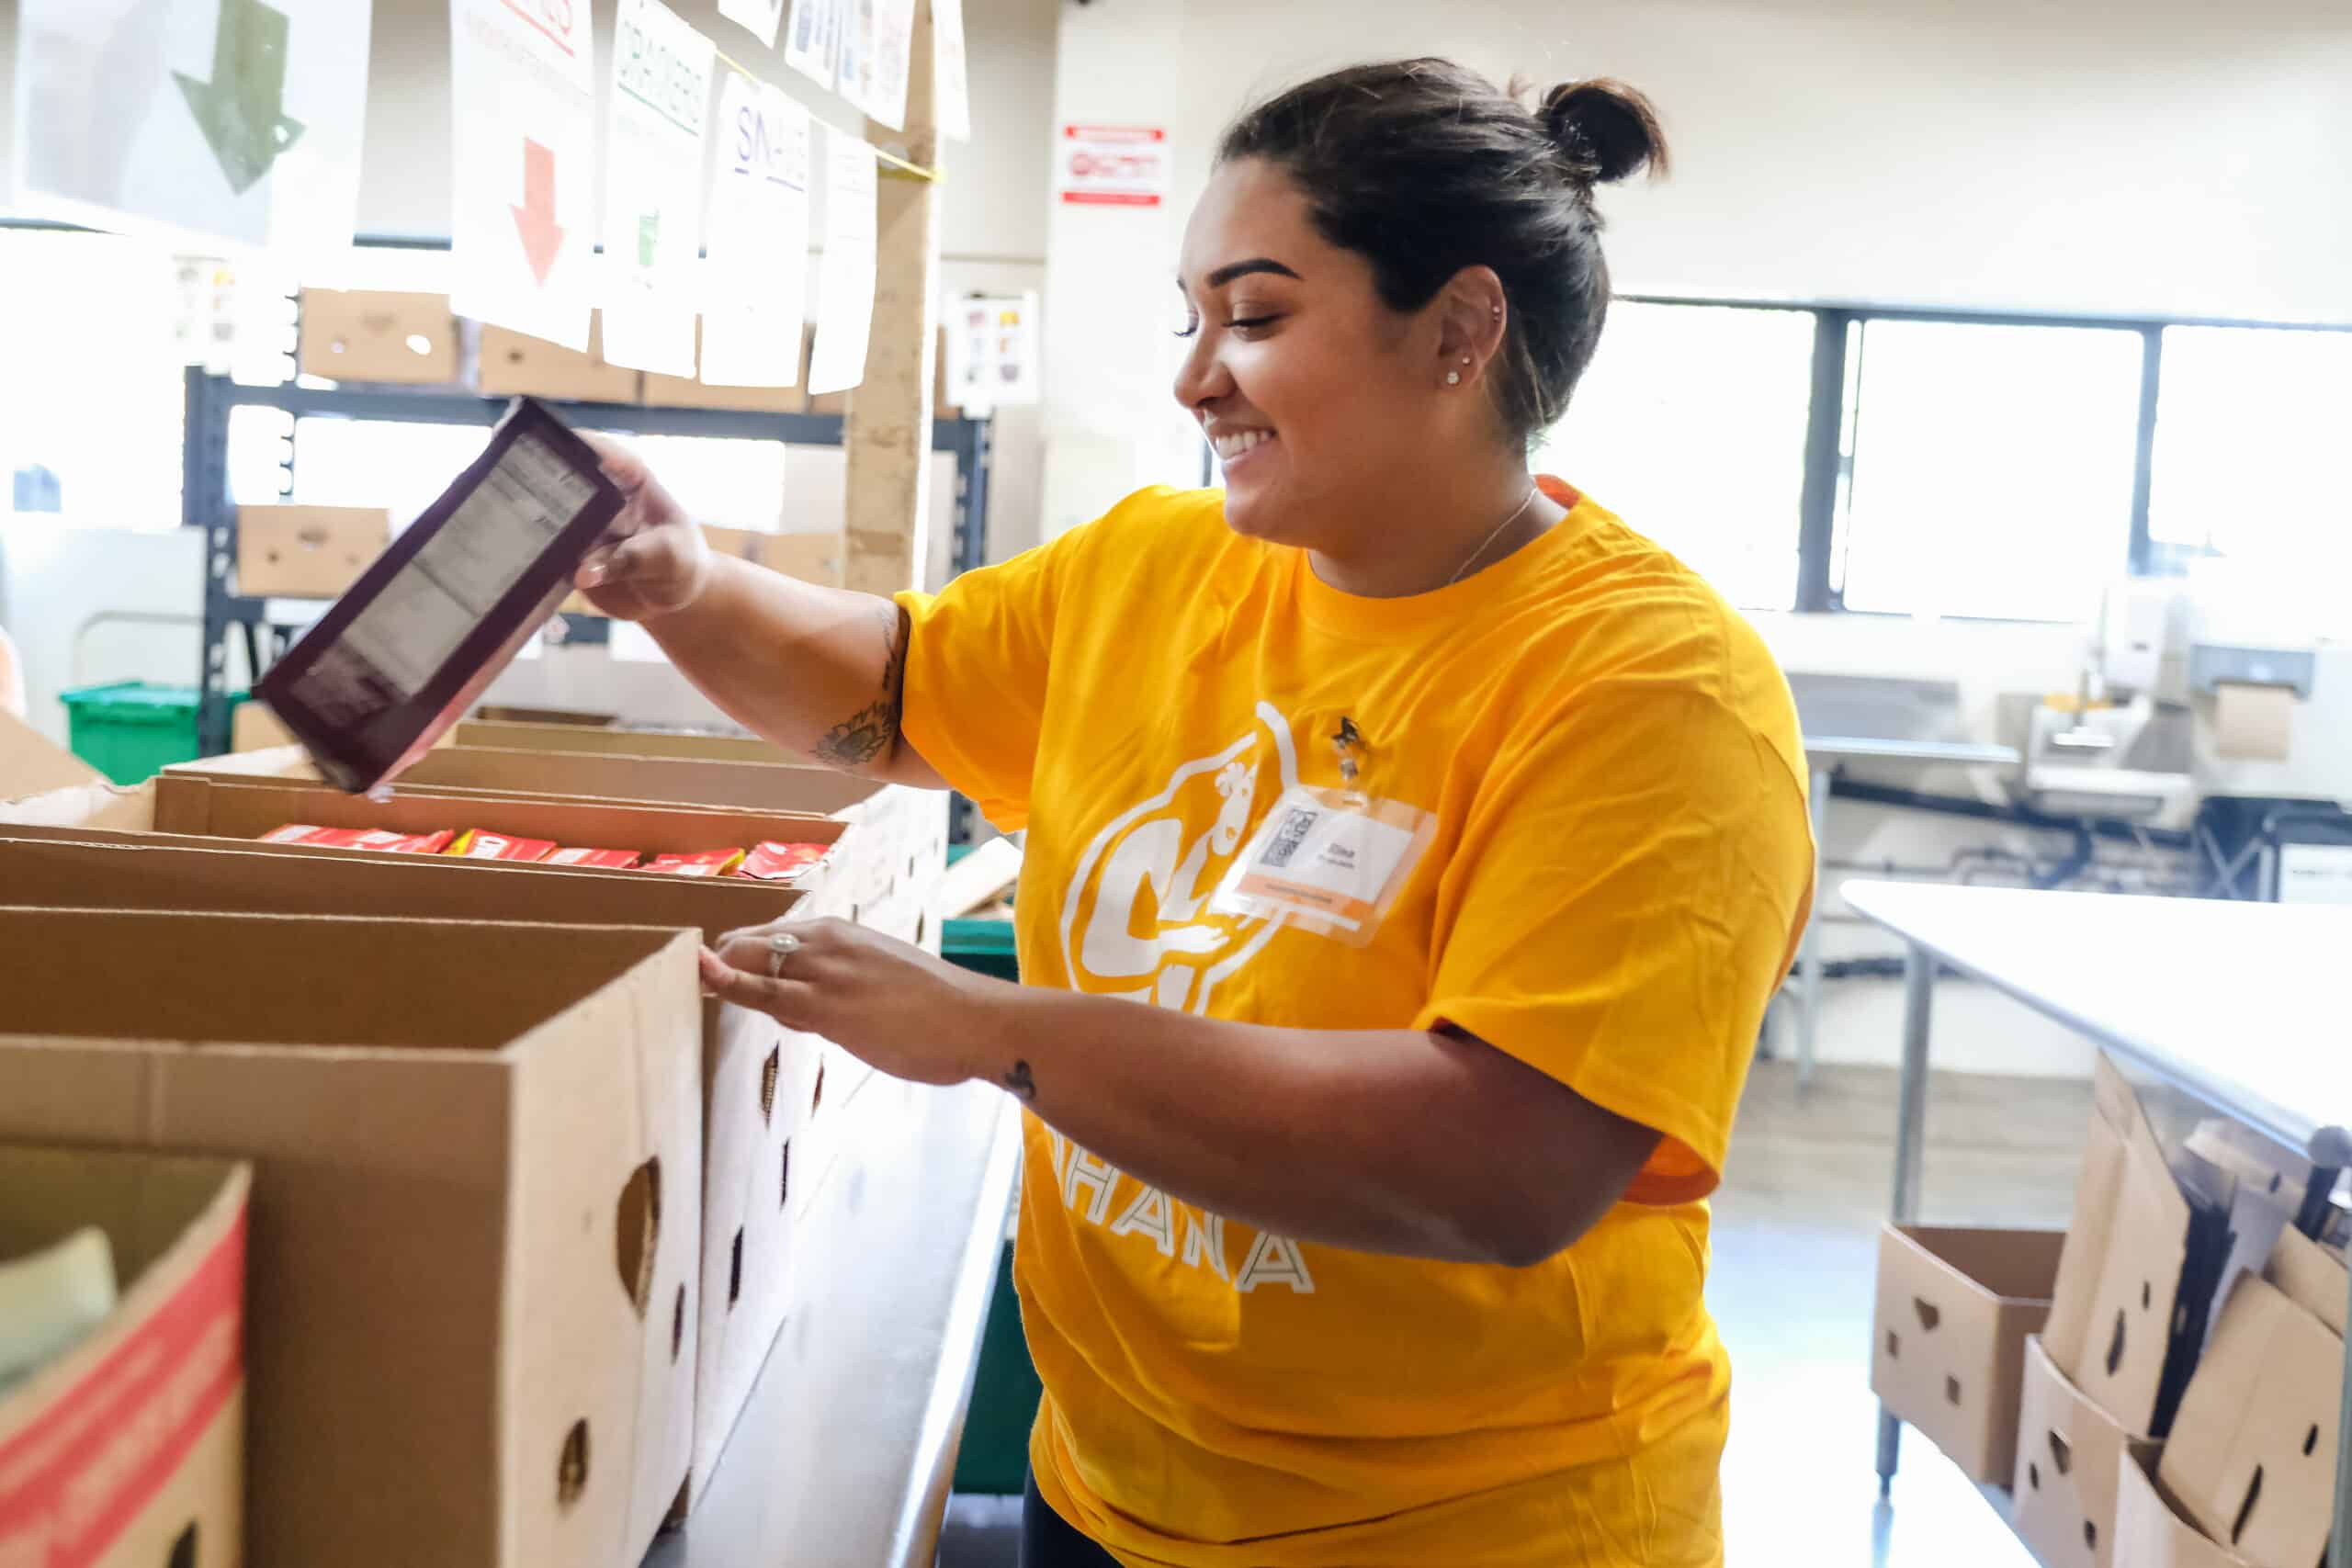 Volunteer Rina sorts boxed foods by cateogry.